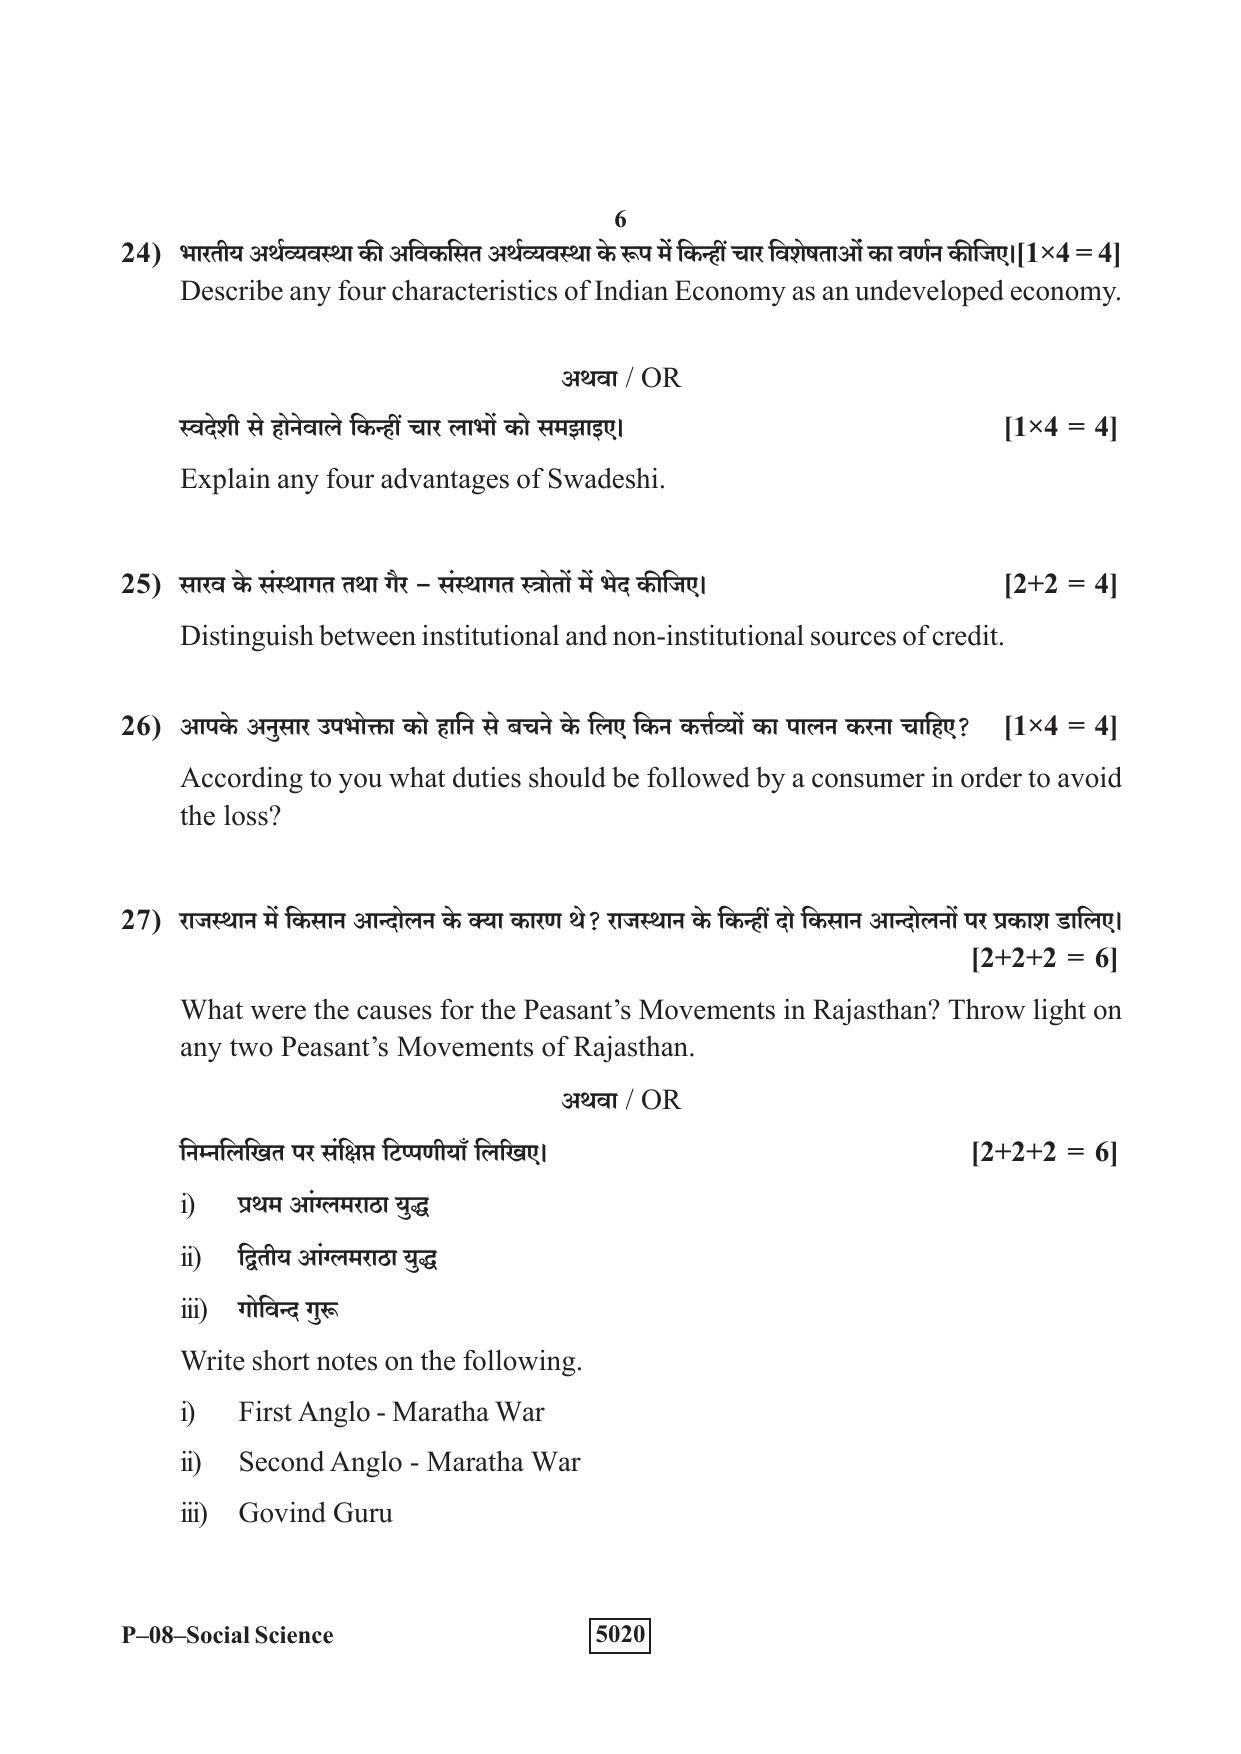 RBSE 2019 Social Science Praveshika Question Paper - Page 6